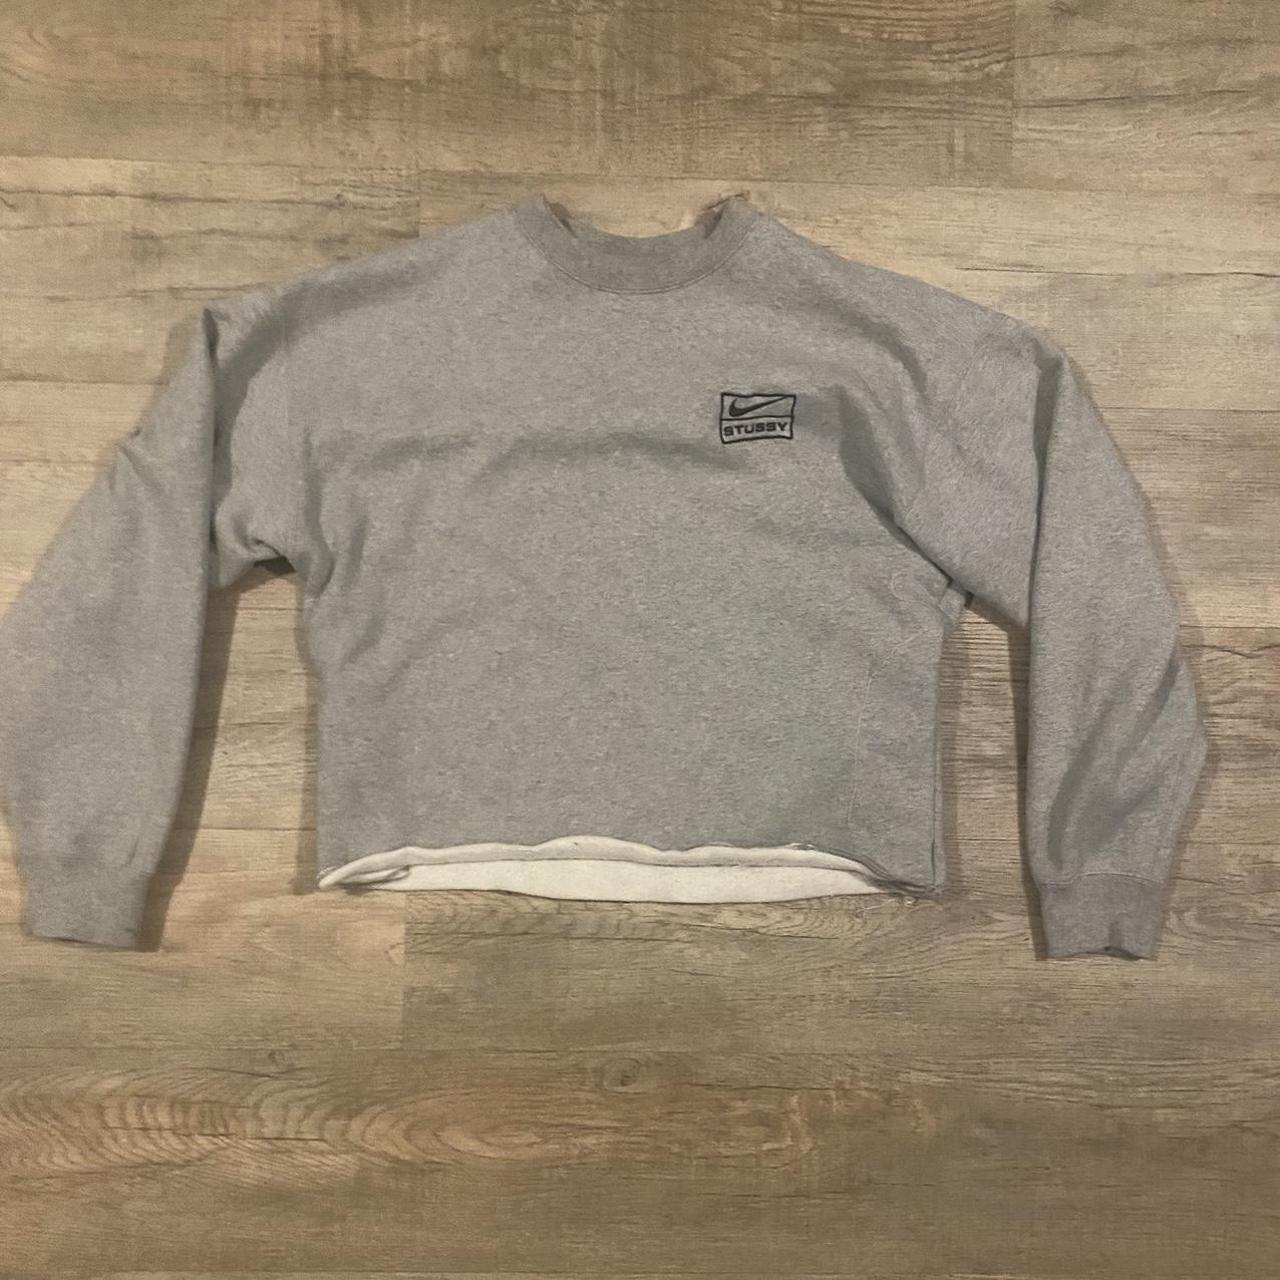 Nike x Stussy Collab Sweater Size L Cropped and... - Depop